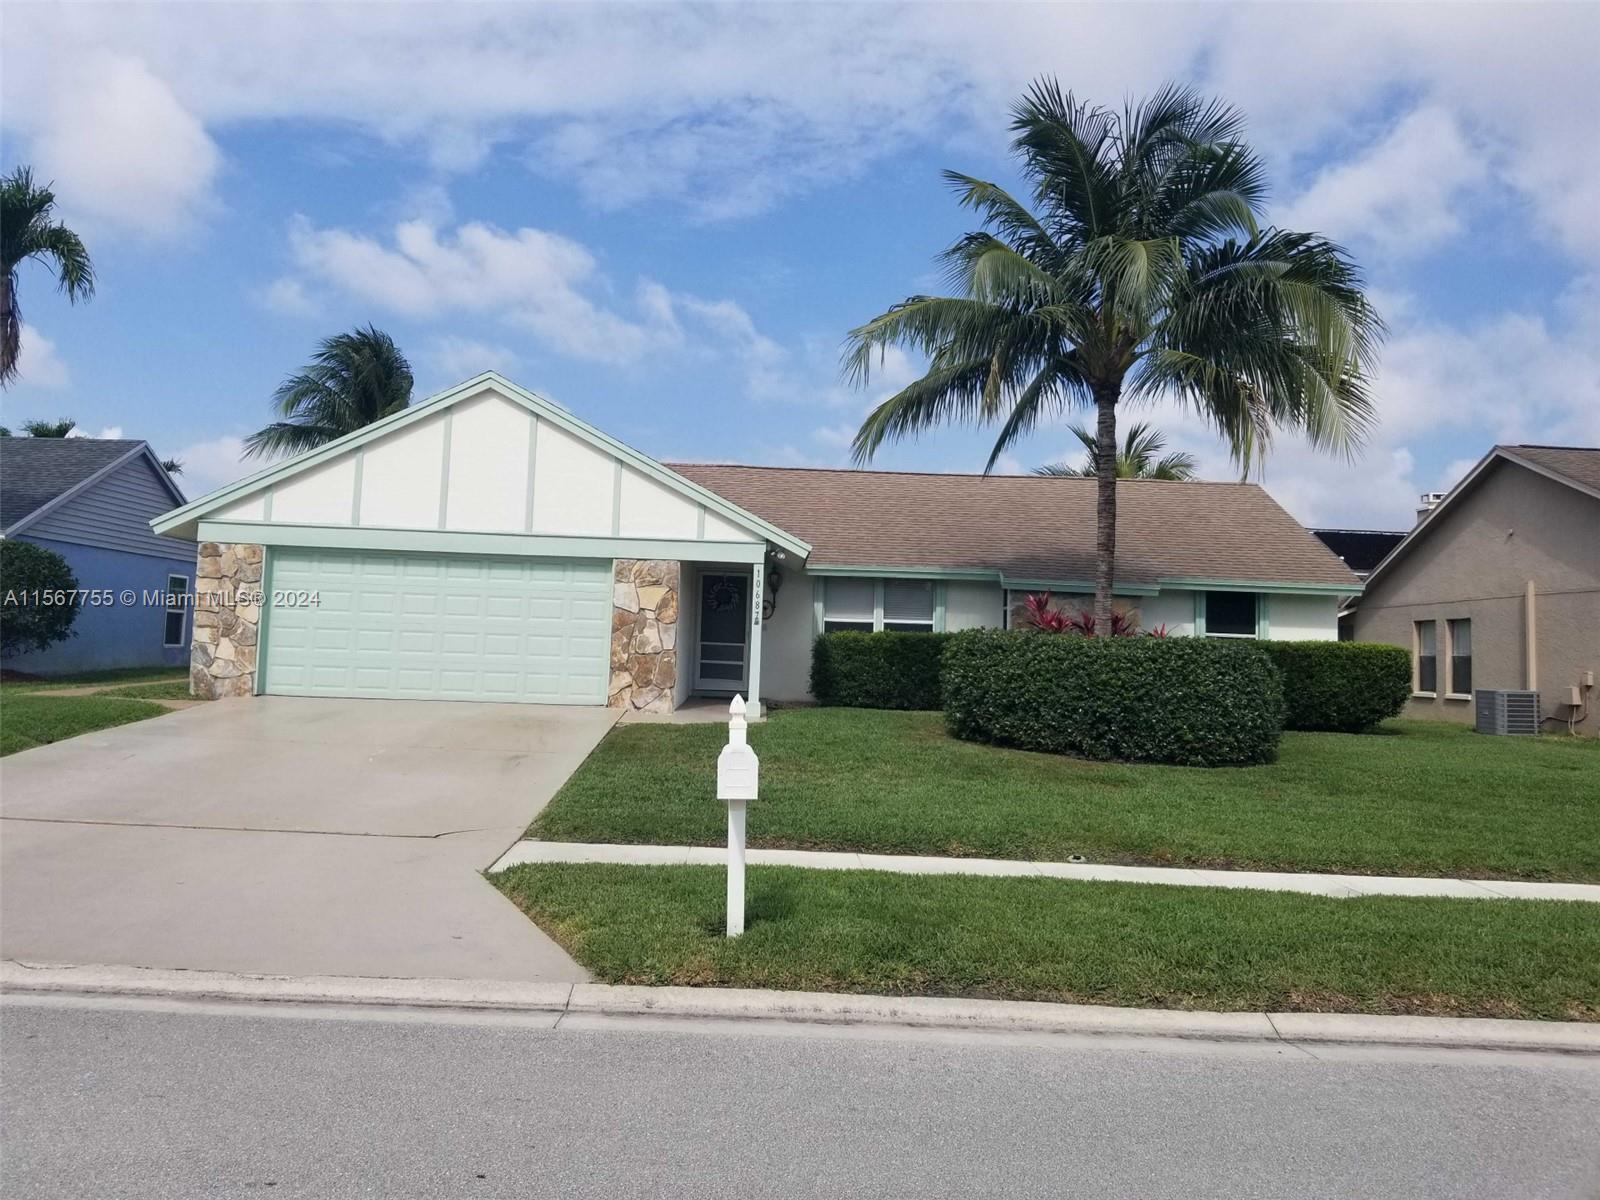 Well maintained Indian Wells 4 bedroom, 2 bath pool home located in a all age community with low HOA